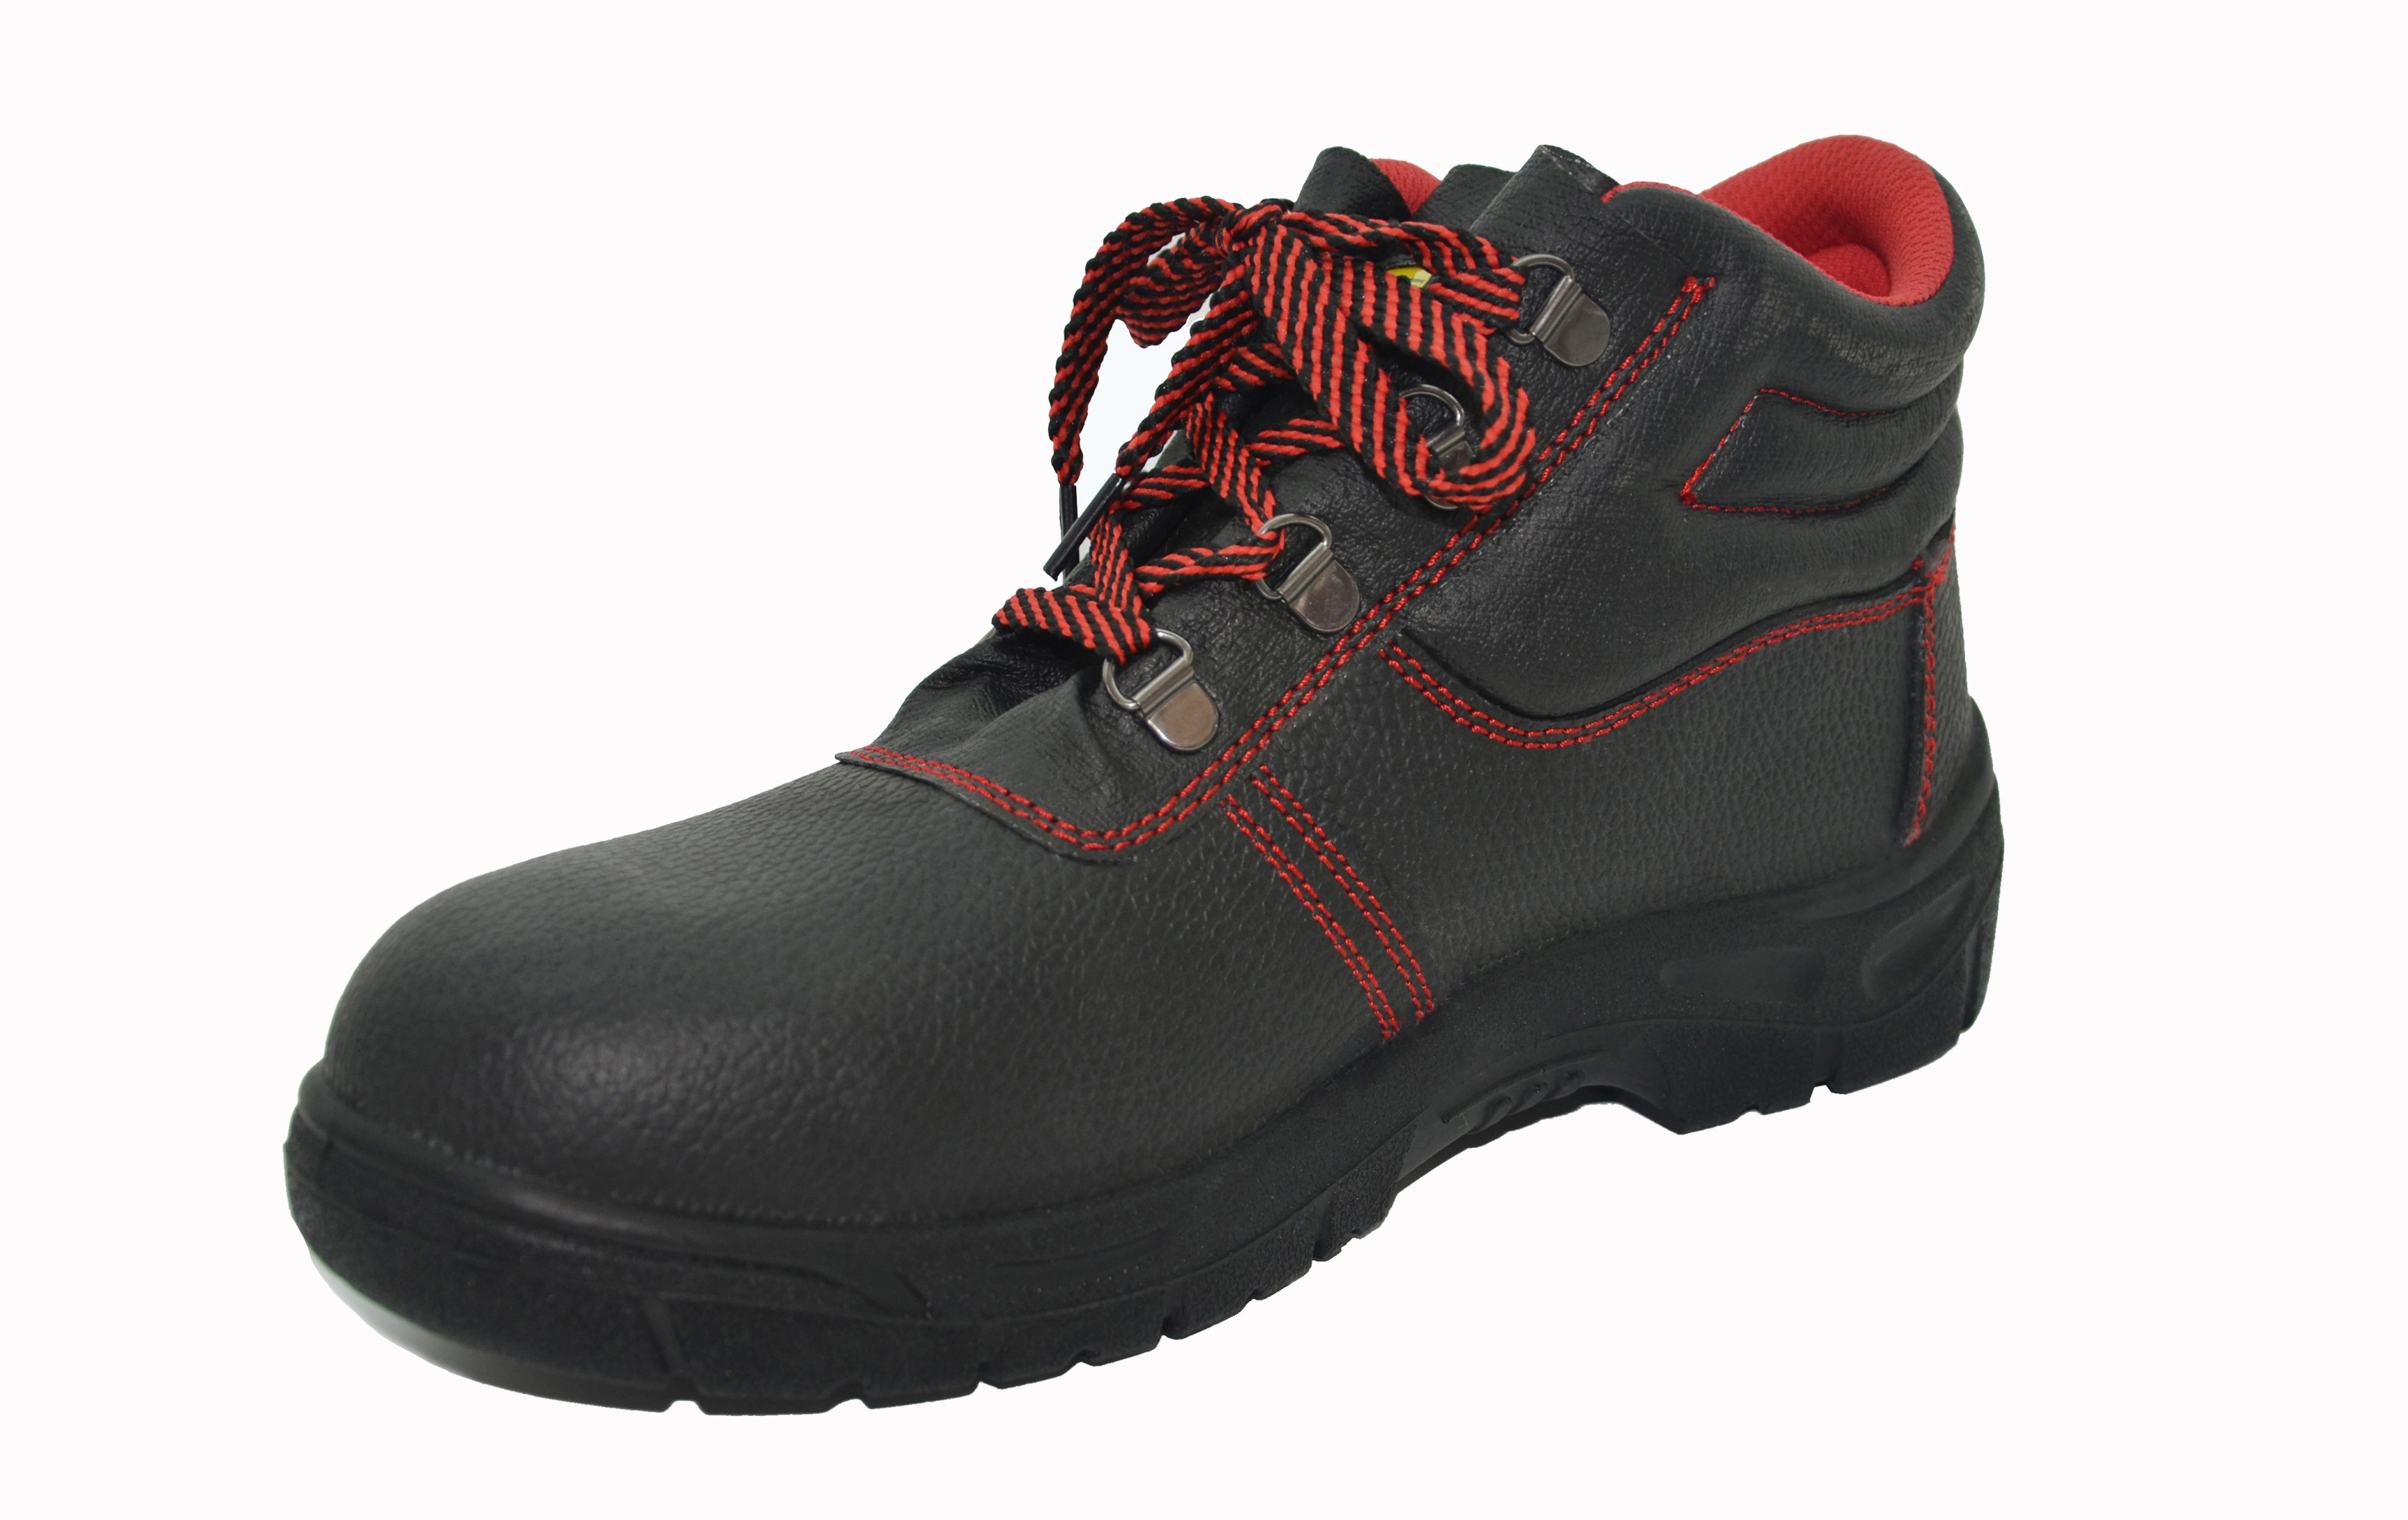 Construction Site Comfortable Safety Shoes Genuine Buffalo Leather Upper